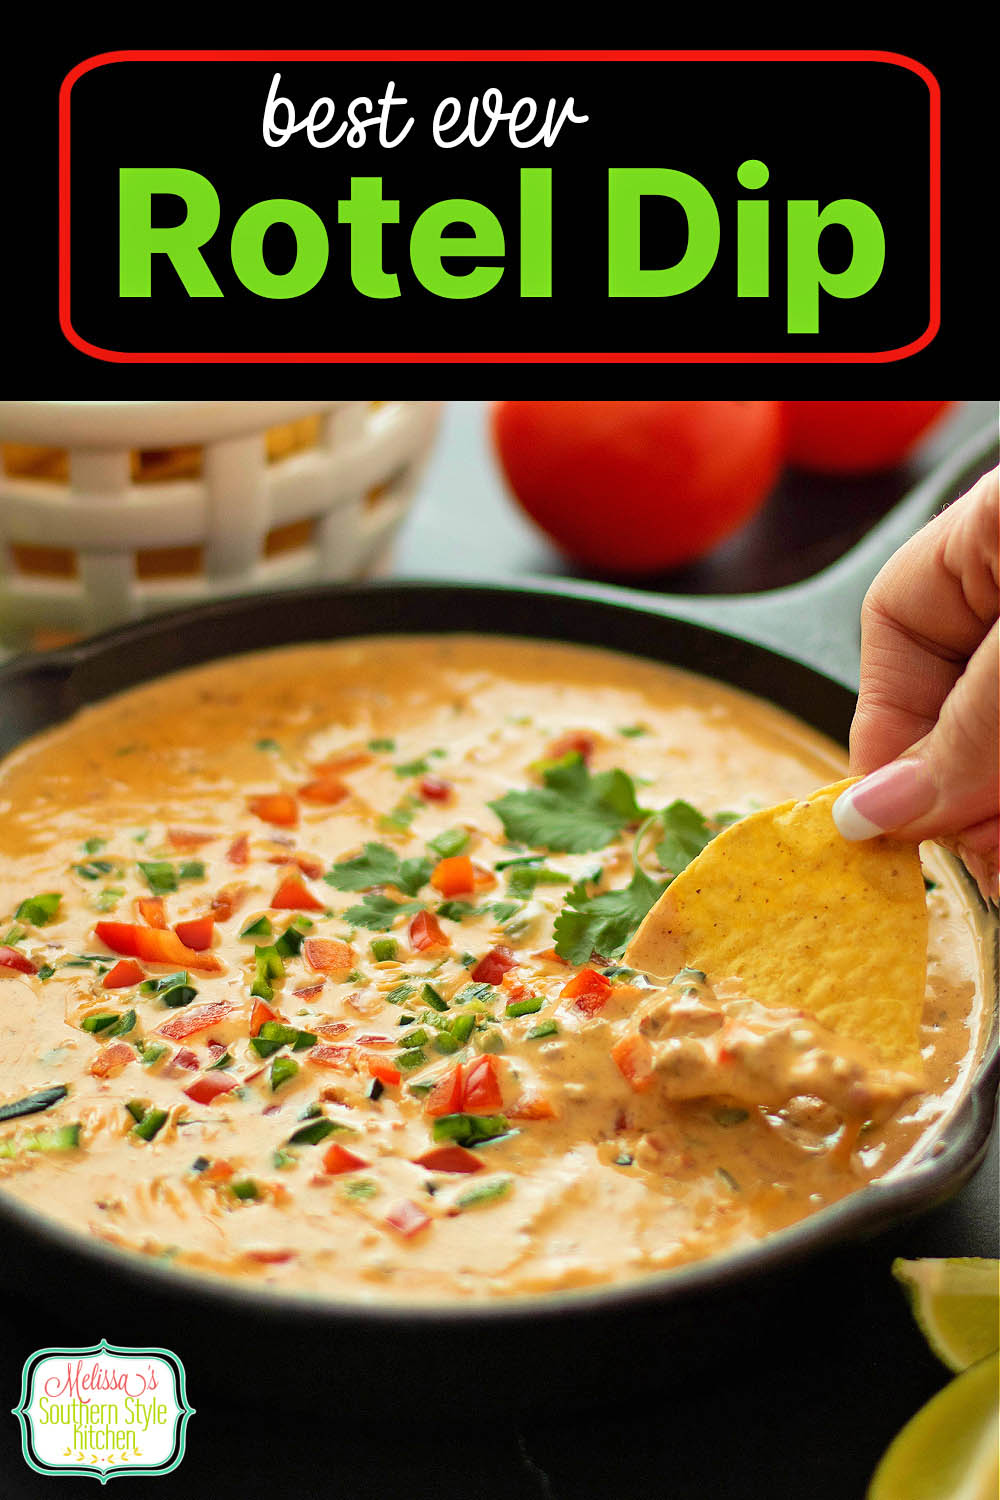 This Rotel Dip features a few ingredient twists to give it a pop of flavor. #rotel #roteltomatoes #roteldip #cheesediprecipes #superbowlrecipes #velveeta #velveetarecipes #bestroteldip via @melissasssk